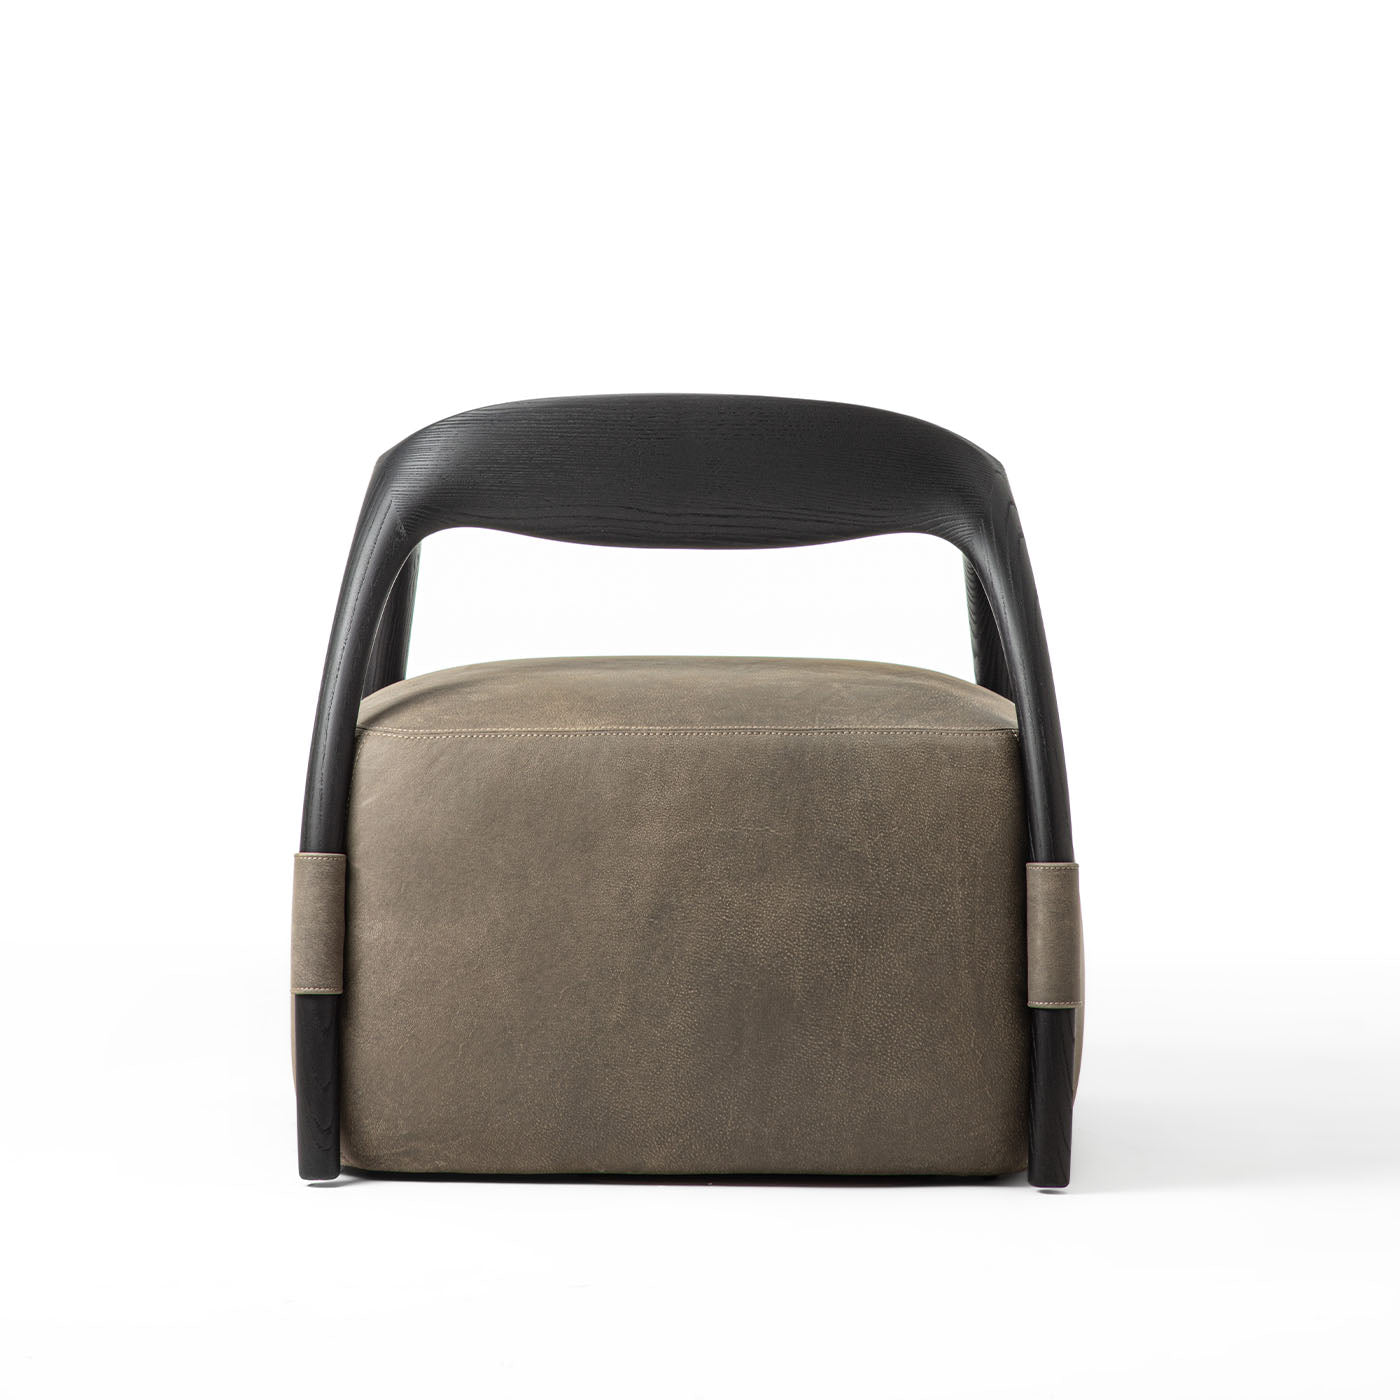 Chassis Black Ash Solid Wood Armchair & Leather Upholstery - Alternative view 1